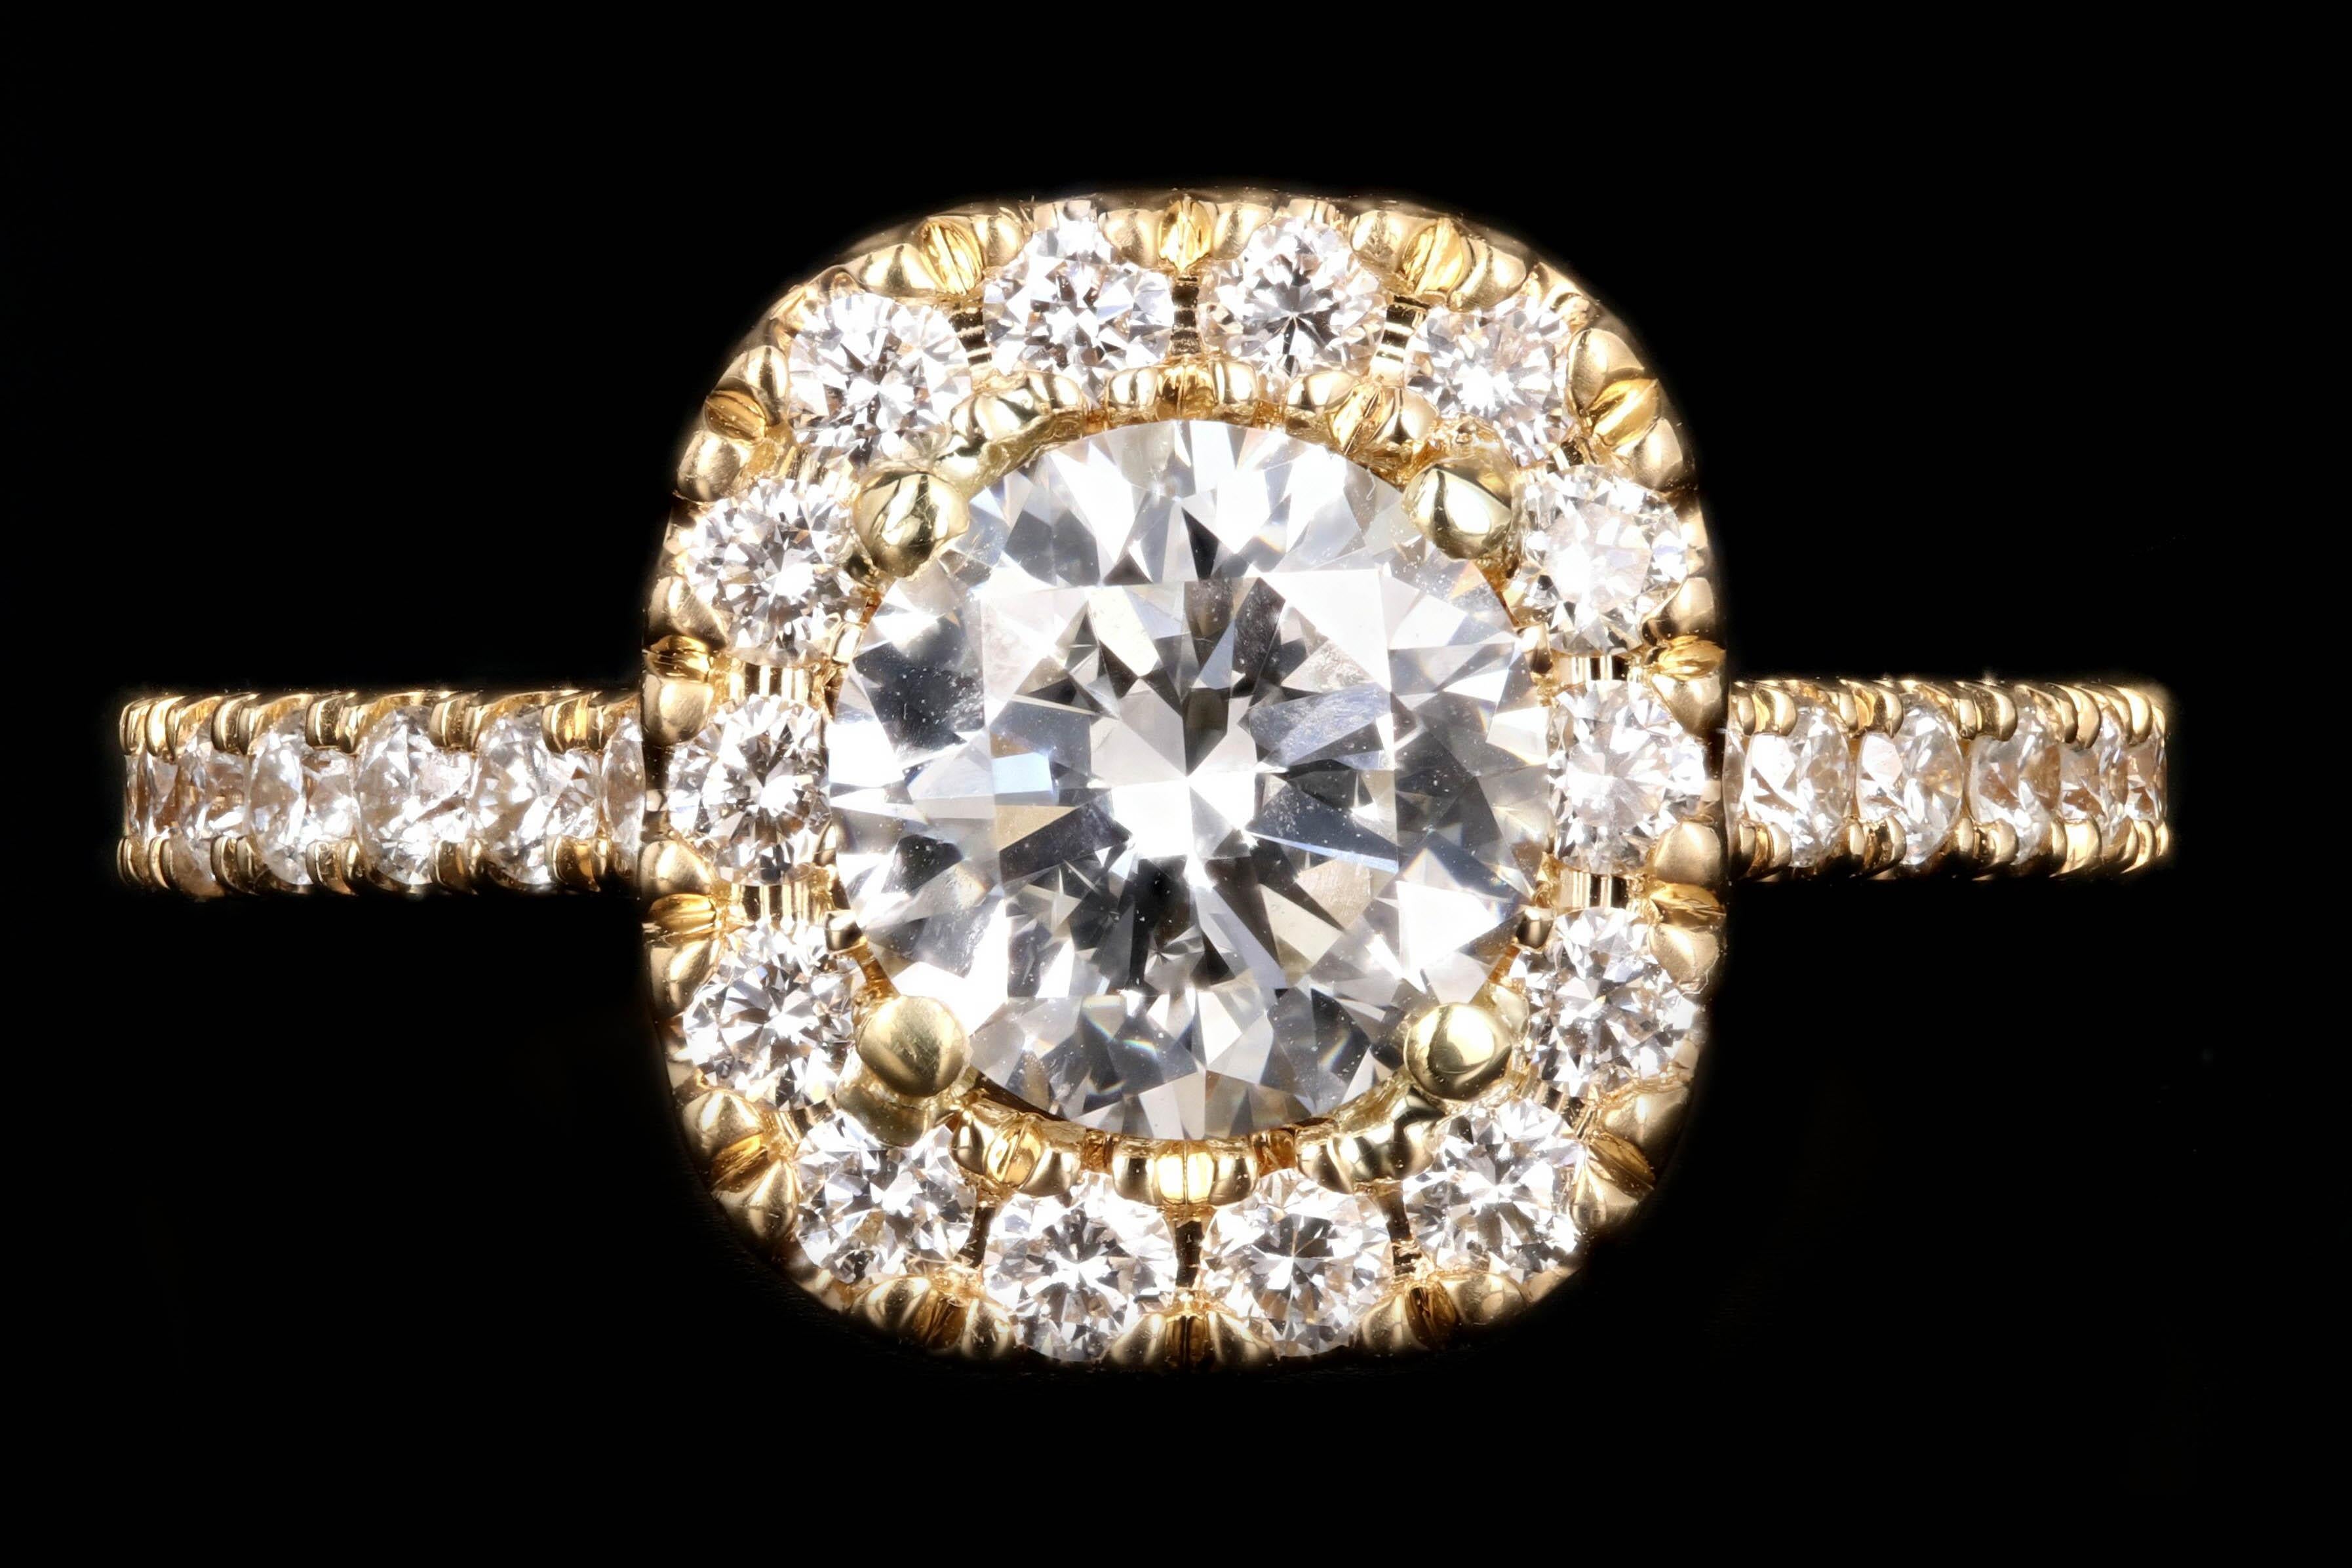 Era: New

Composition: 18K Yellow Gold

Primary Stone: Round Brilliant Cut Diamond

Carat Weight: 1.31 Carat

Color: G

Clarity: VVS2

Accent Stones: Round Brilliant Cut Diamonds

Carat Weight: .50 Carats

Color: F-G

Clarity: VS1/2

Total Carat